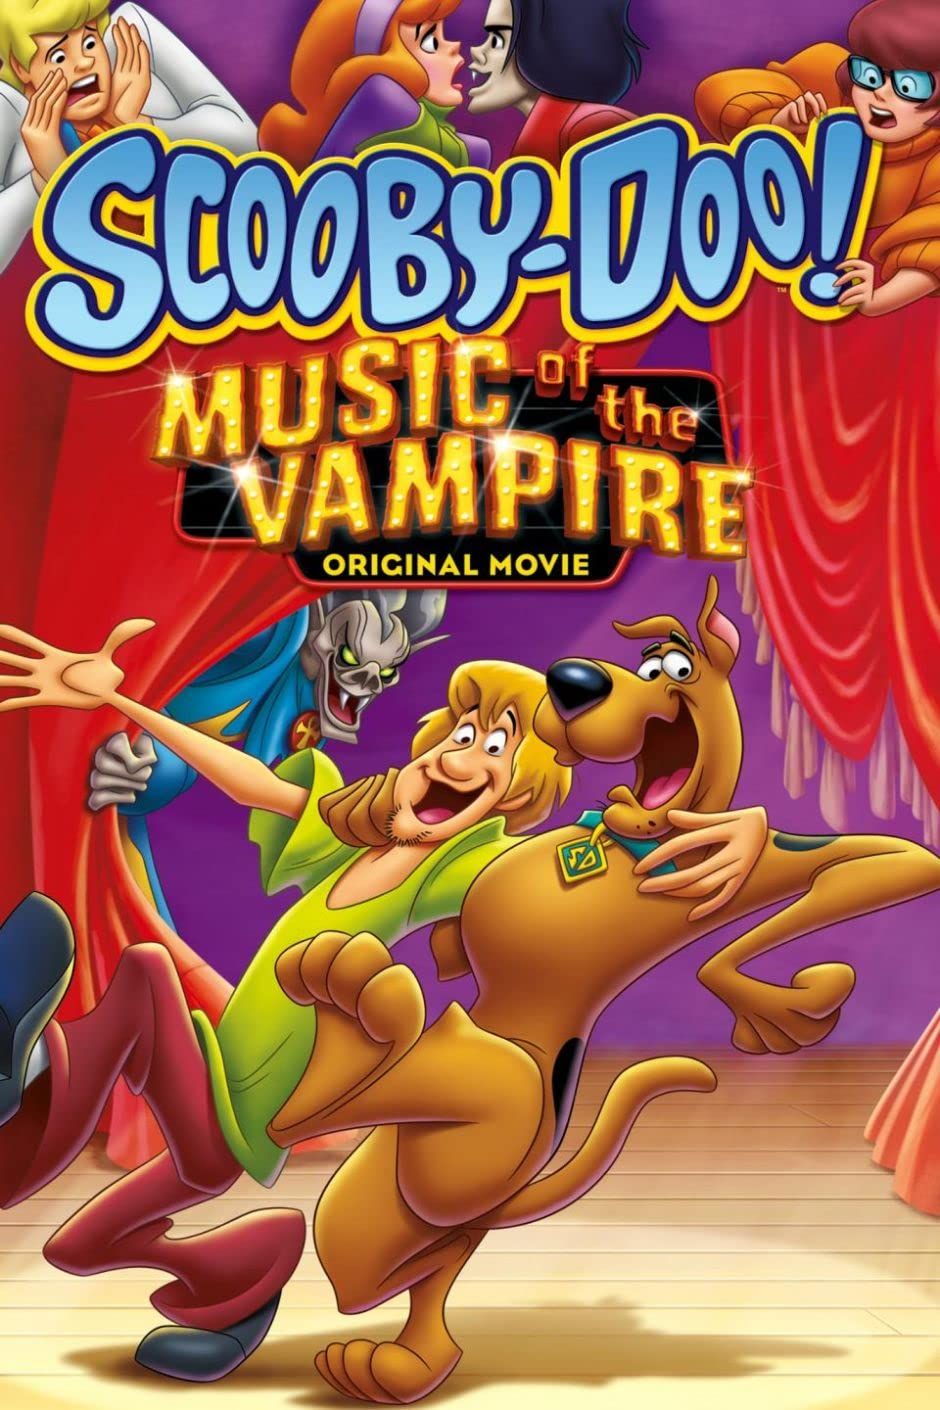 Scooby-Doo Music of the Vampire (2012) Hindi Dubbed BDRip download full movie